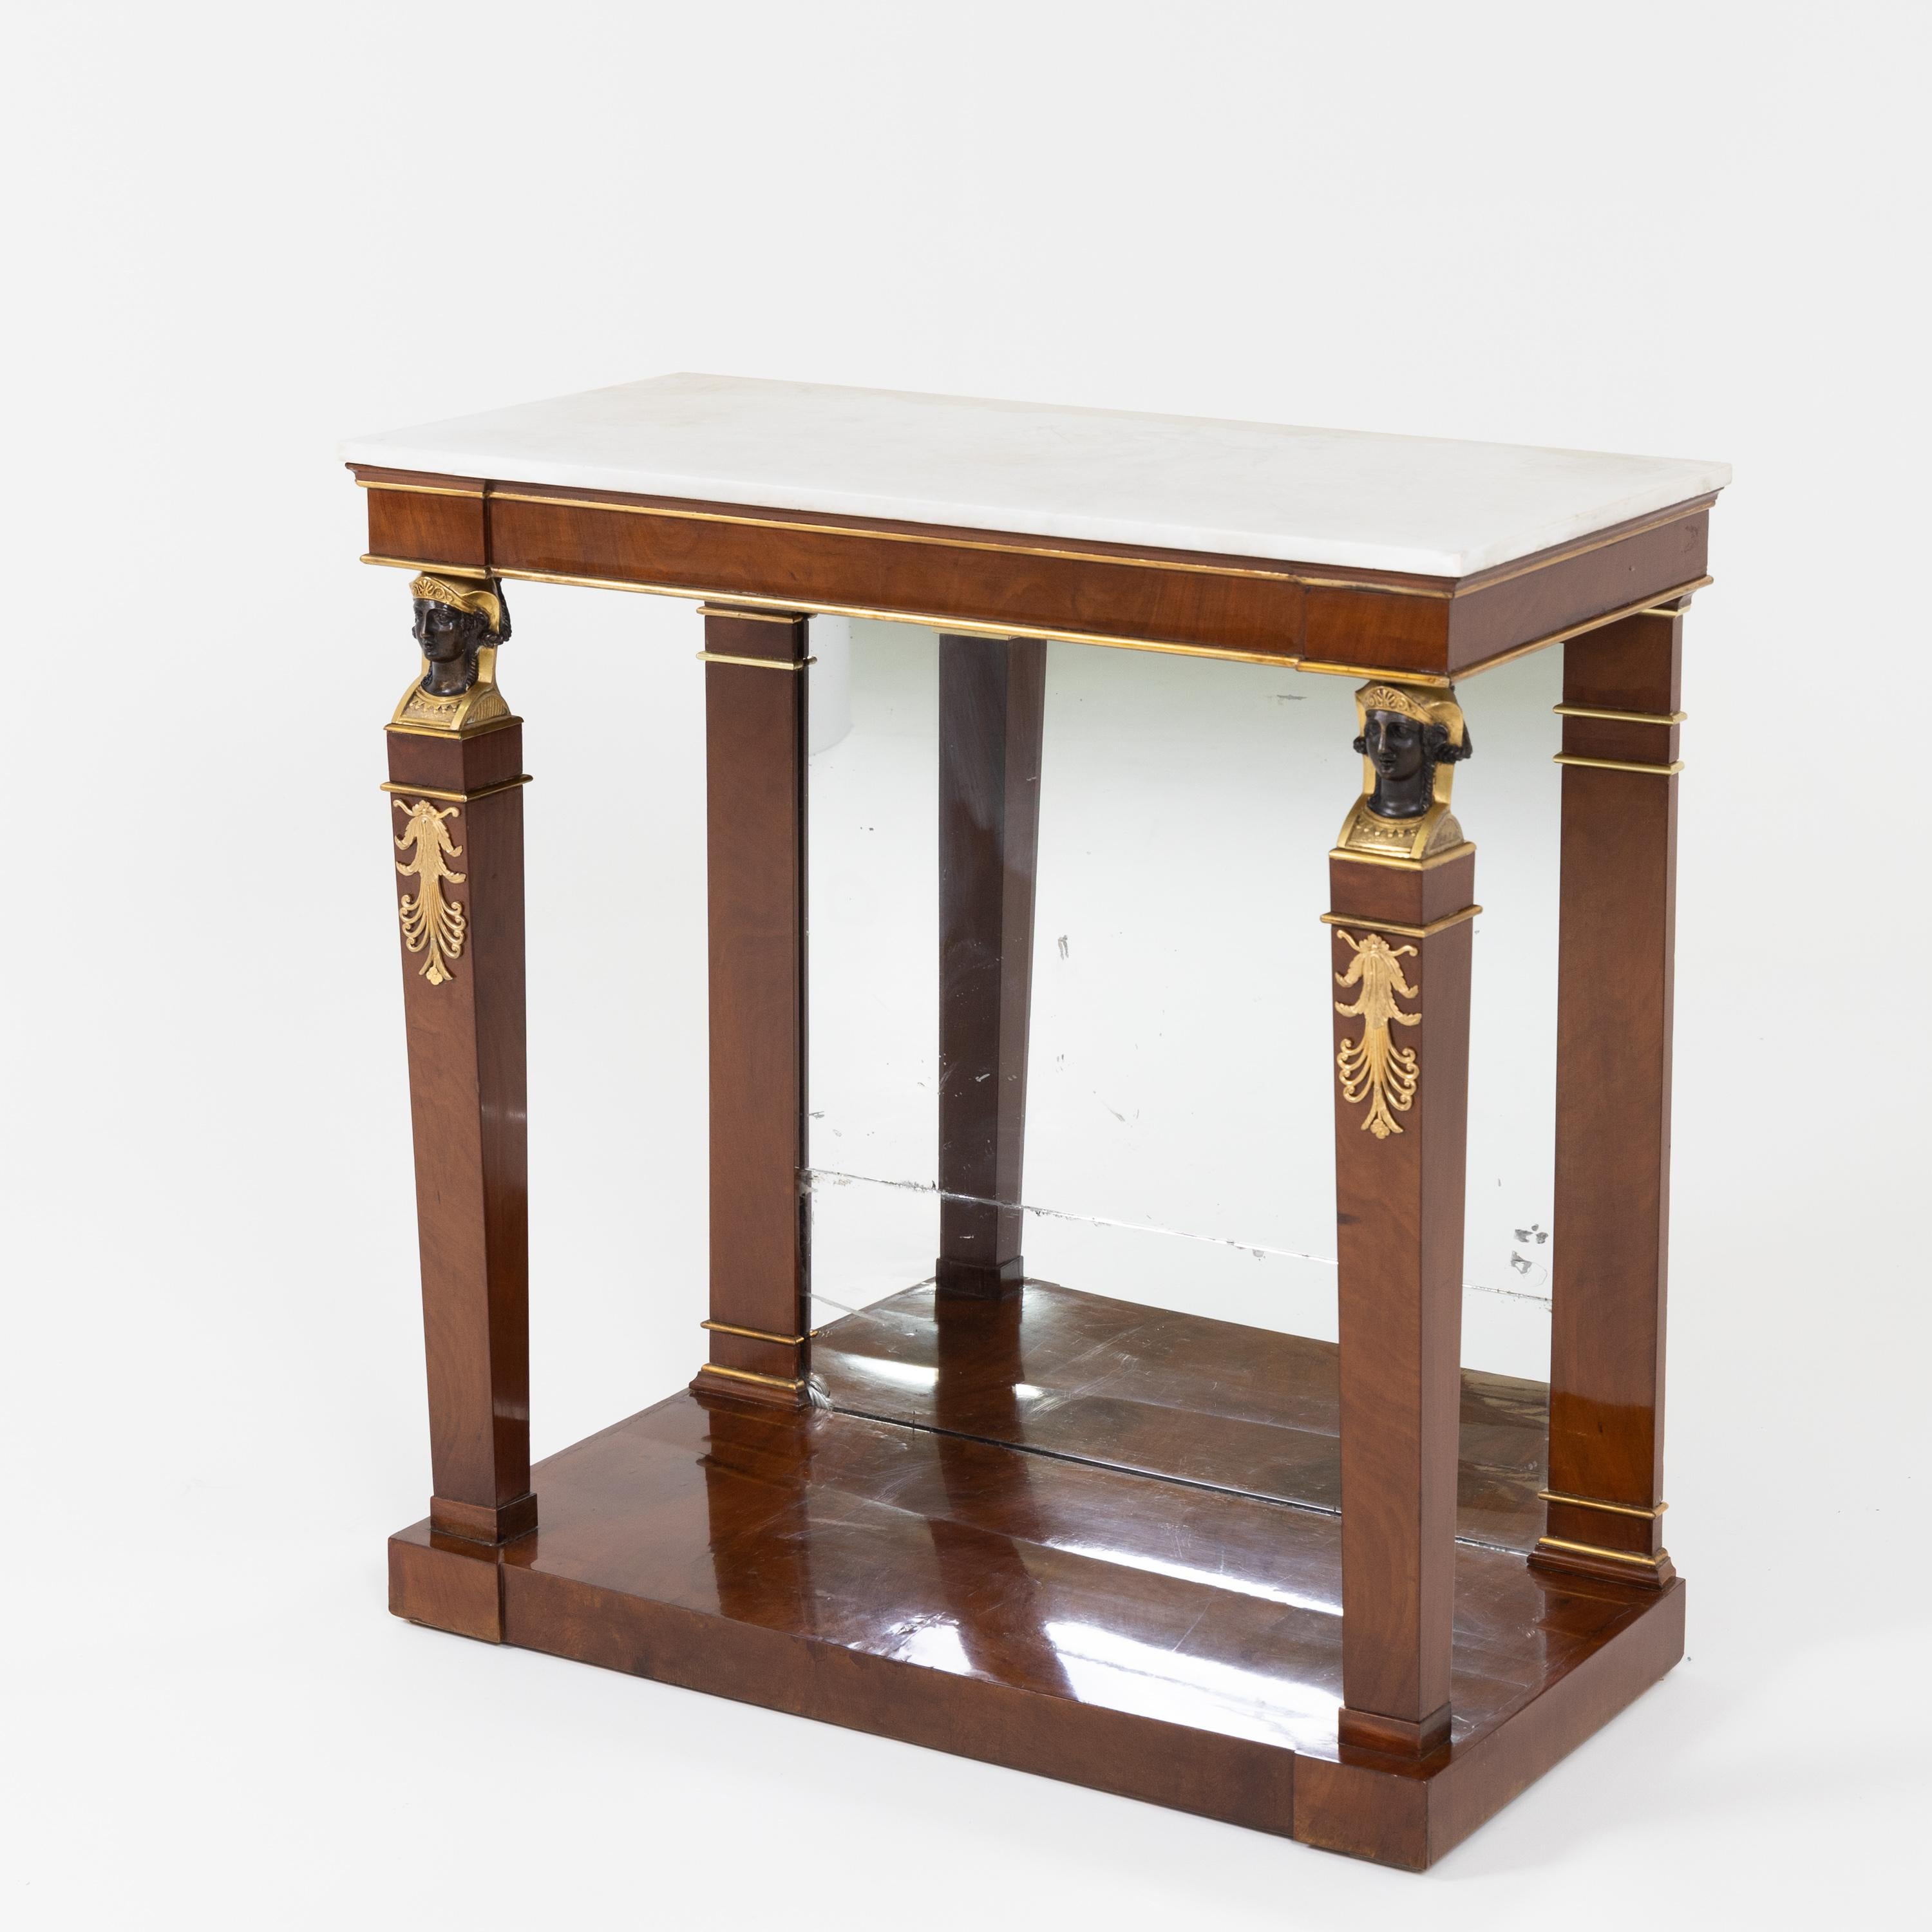 Empire console table on rectangular pedestal with partially gilded, blackened caryatid heads at the front and pilasters with brass mouldings at the back. The back wall has an old mirror glass. The white marble top rests on a straight frame with